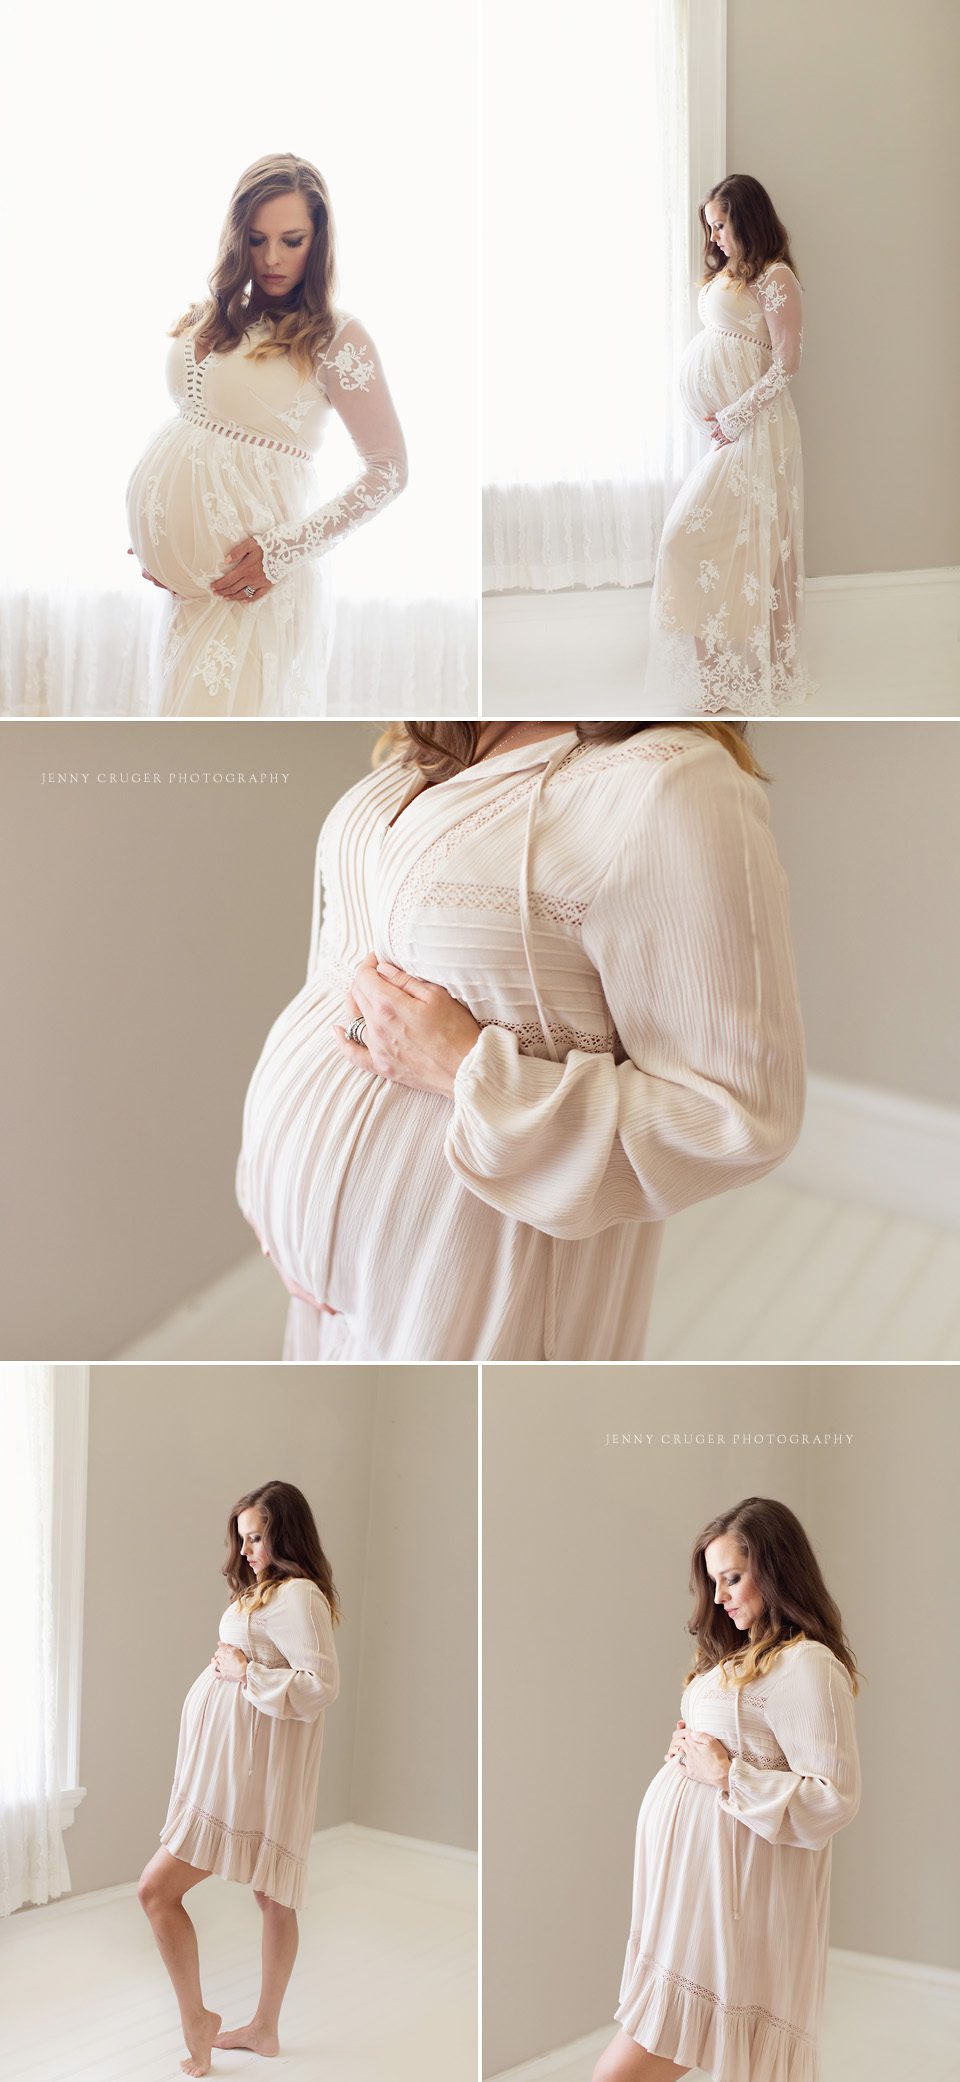 franklin maternity photographer | natural maternity photography